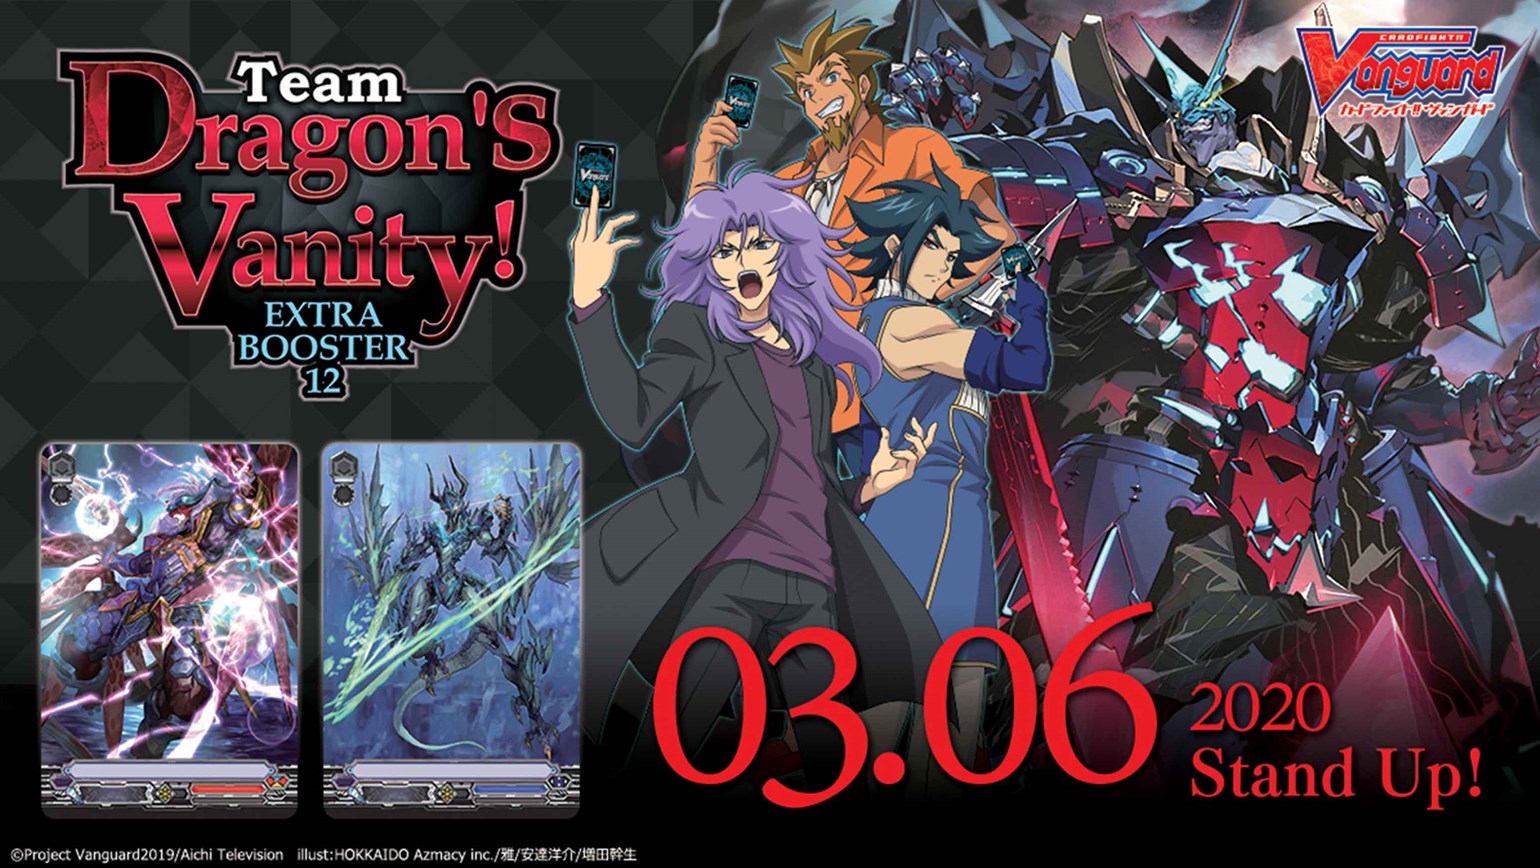 English Edition Cardfight!! Vanguard Extra Booster 12: Team Dragon’s Vanity! Coming March 6th